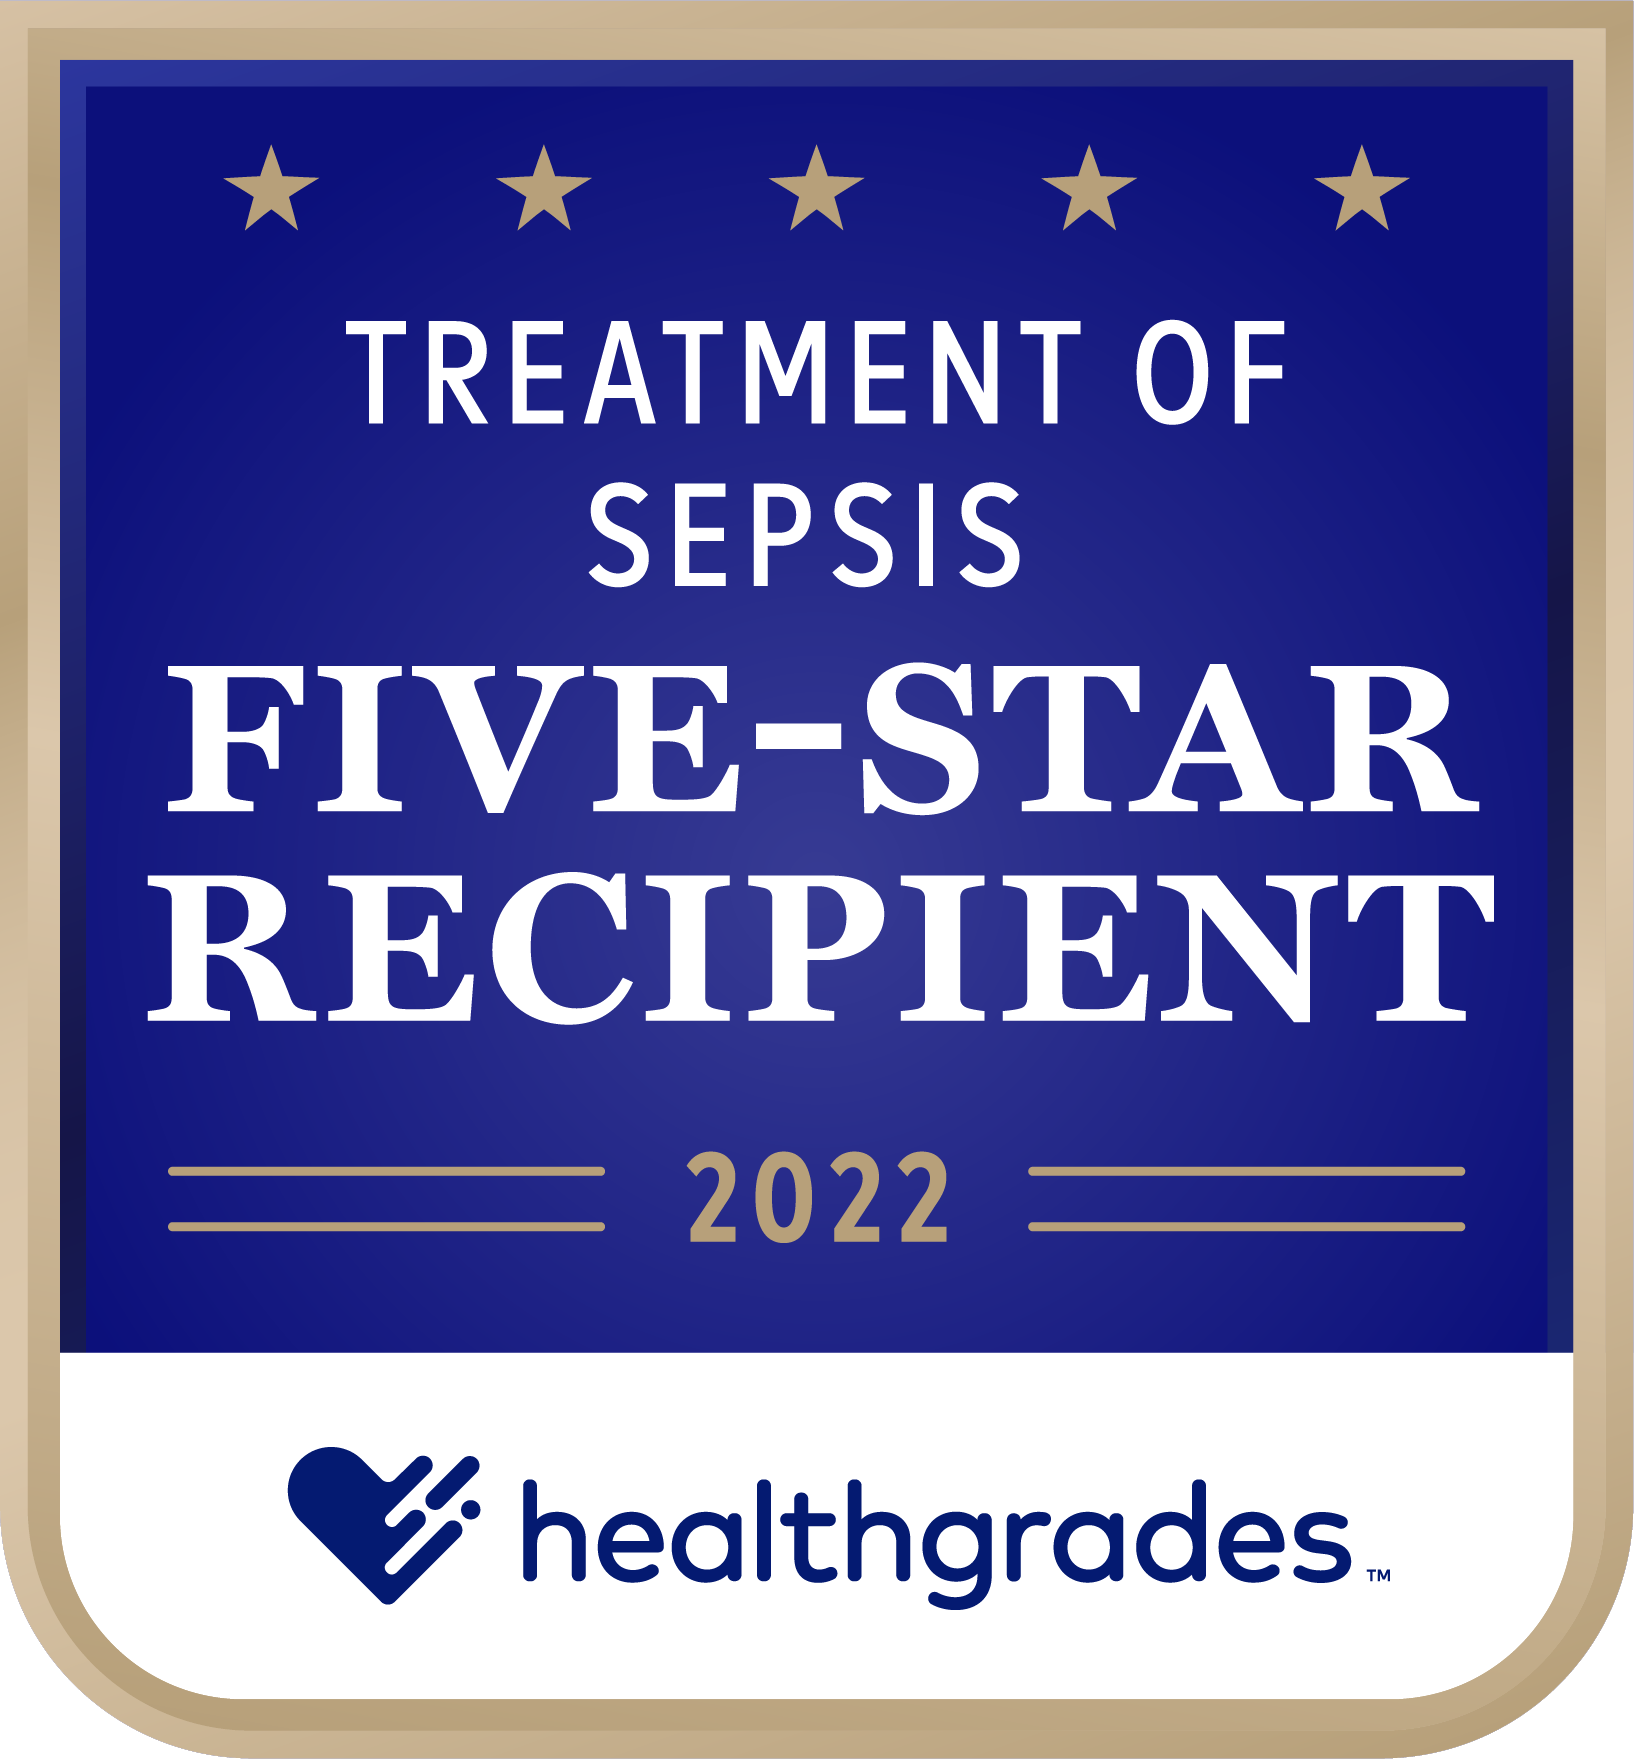 Five-Star_Treatment_of_Sepsis_2022-lbh